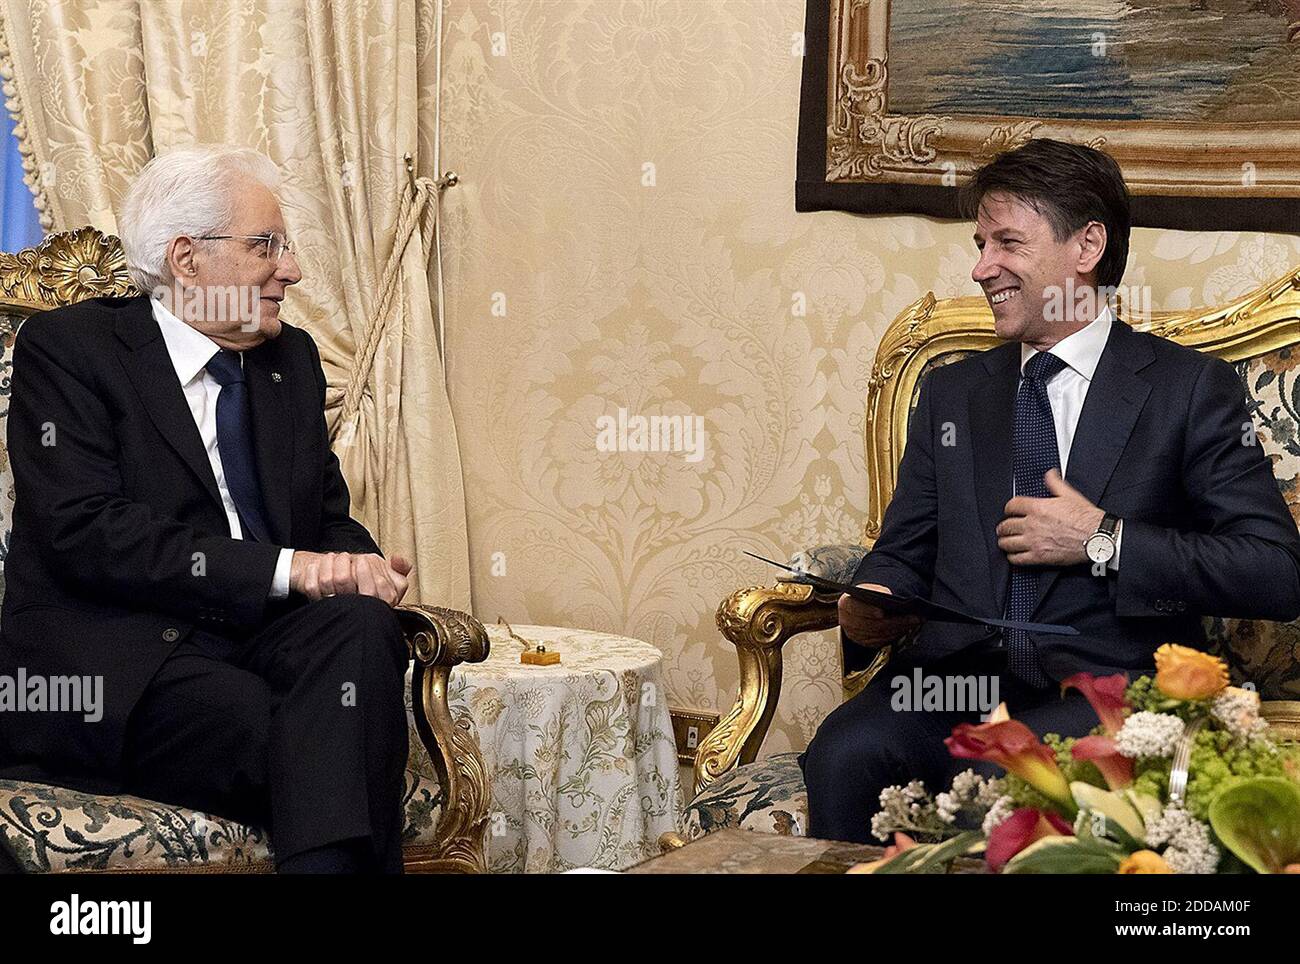 New Italian Prime Minister Giuseppe Conte (R) meets with president Sergio Mattarella at Quirinale palace on May 31, 2018 in Rome, Italy. Conte presented a list of ministers to Mattarella and the new government will be sworn in the next day. Photo by ABACAPRESS.COM Stock Photo